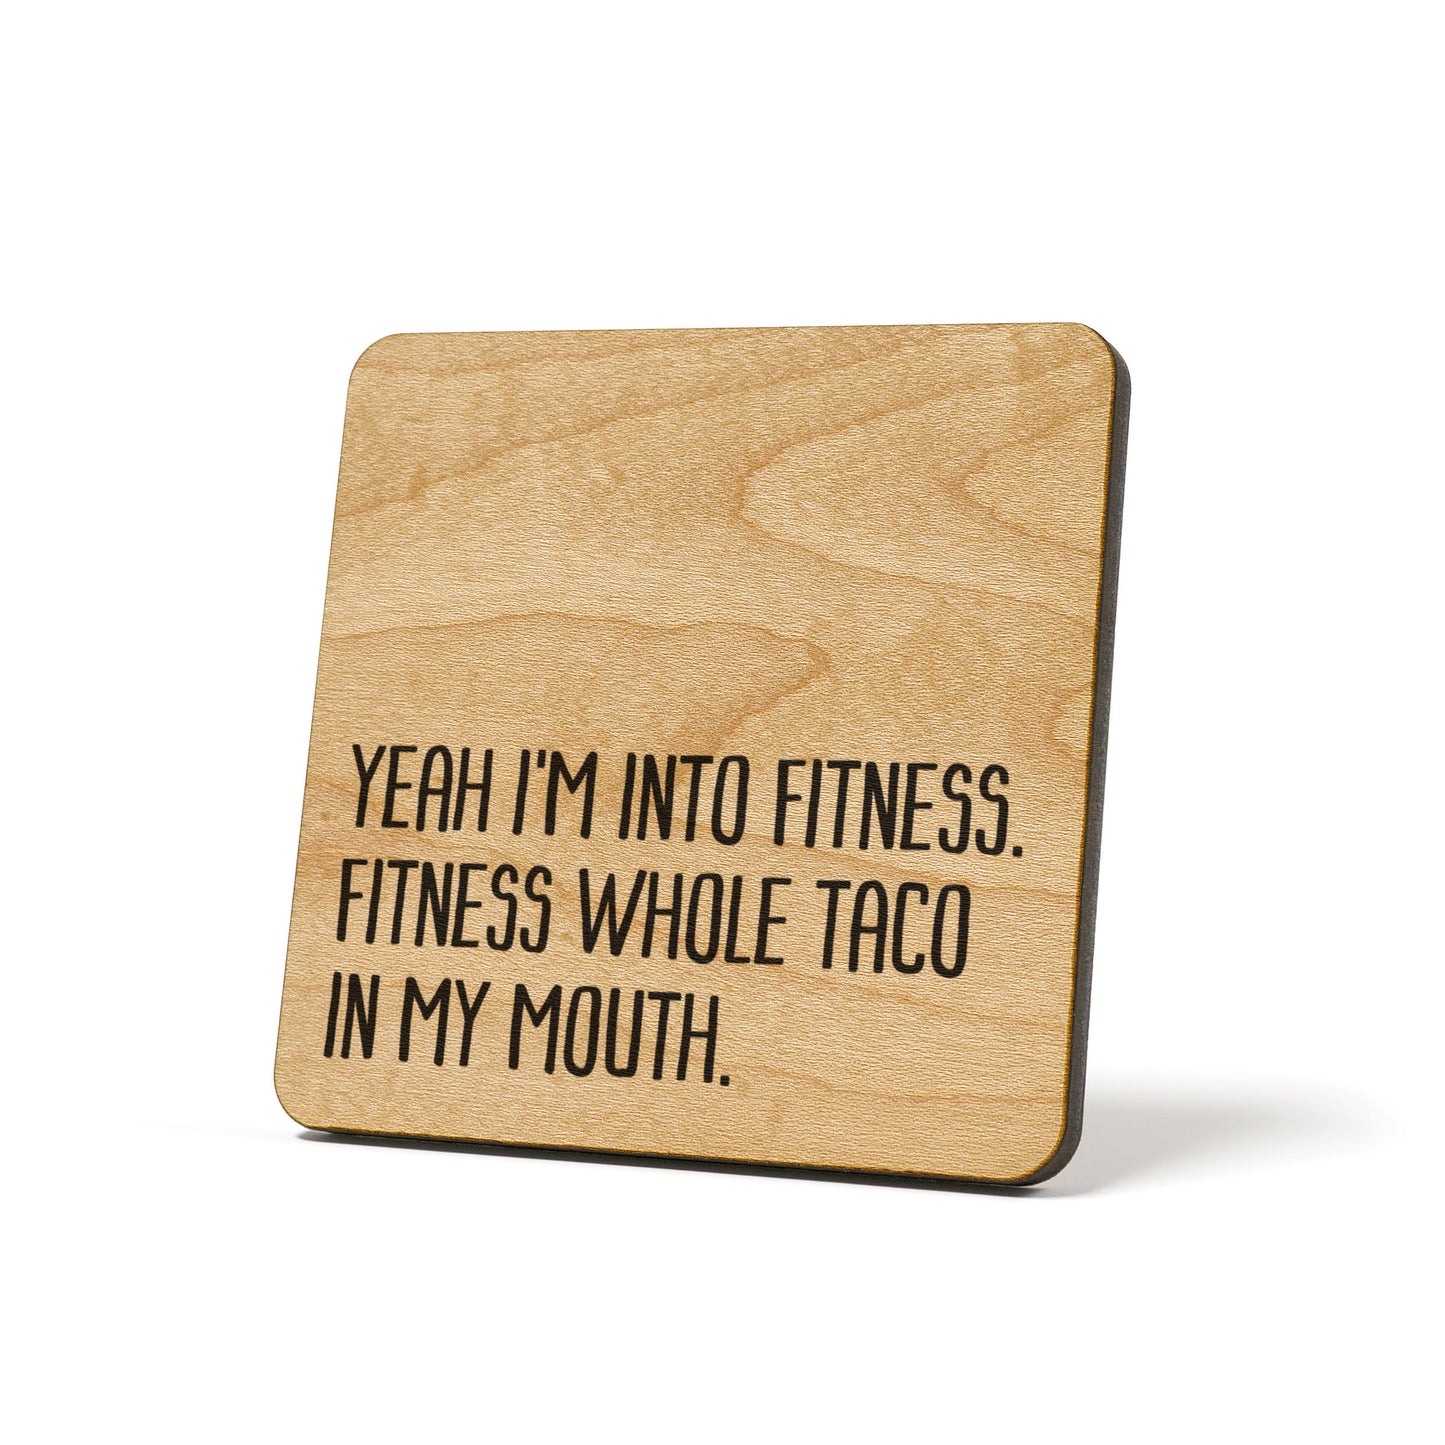 Yeah I'm into fitness. Fitness whole taco in my mouth. Quote Coaster